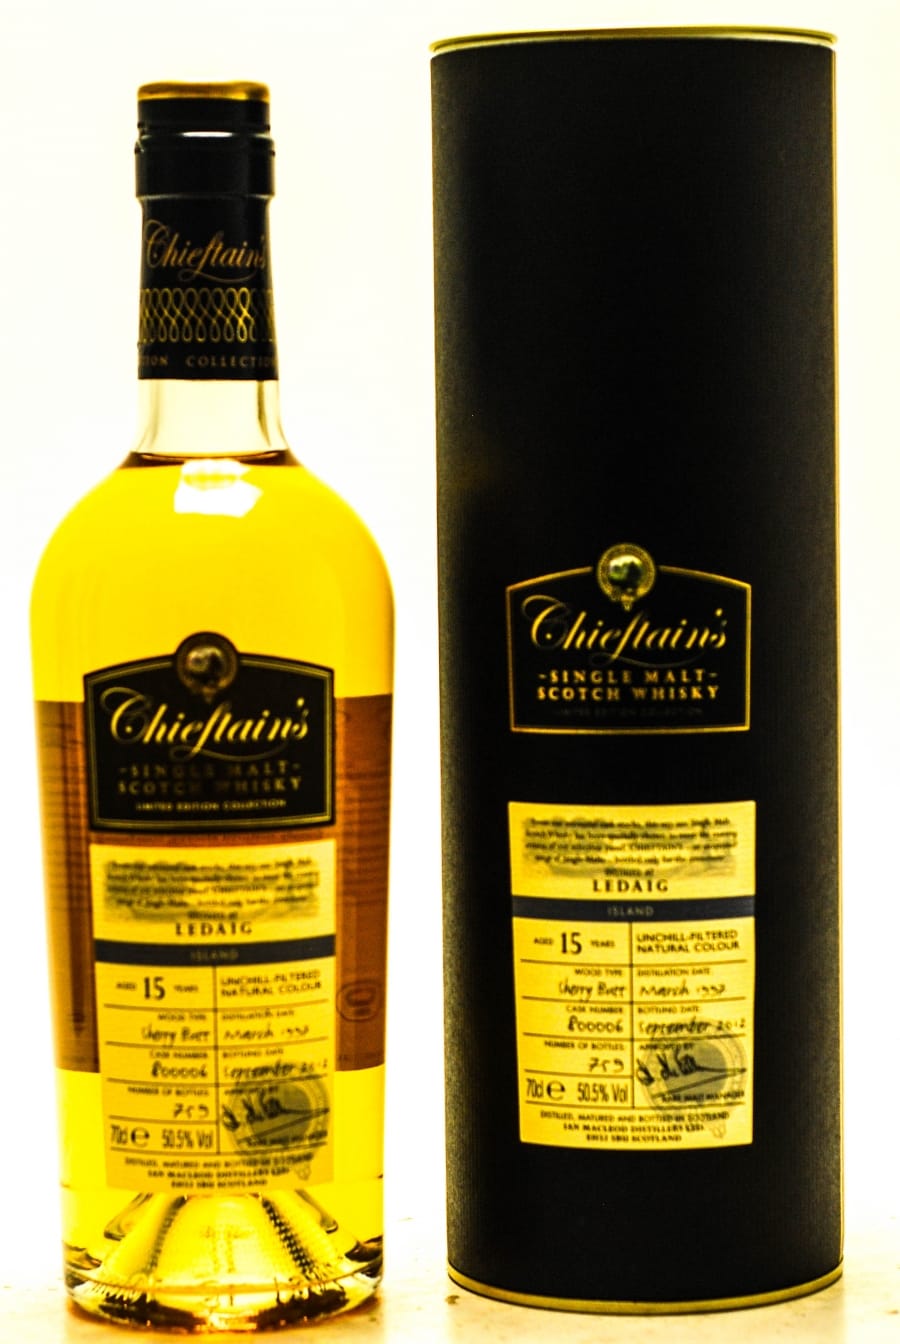 Ledaig - 15 Years Old  Cadenhead authentic collection  Distilled: 1997 Bottled: 10.2012  1 of 246 bottles 56% 1997 Perfect